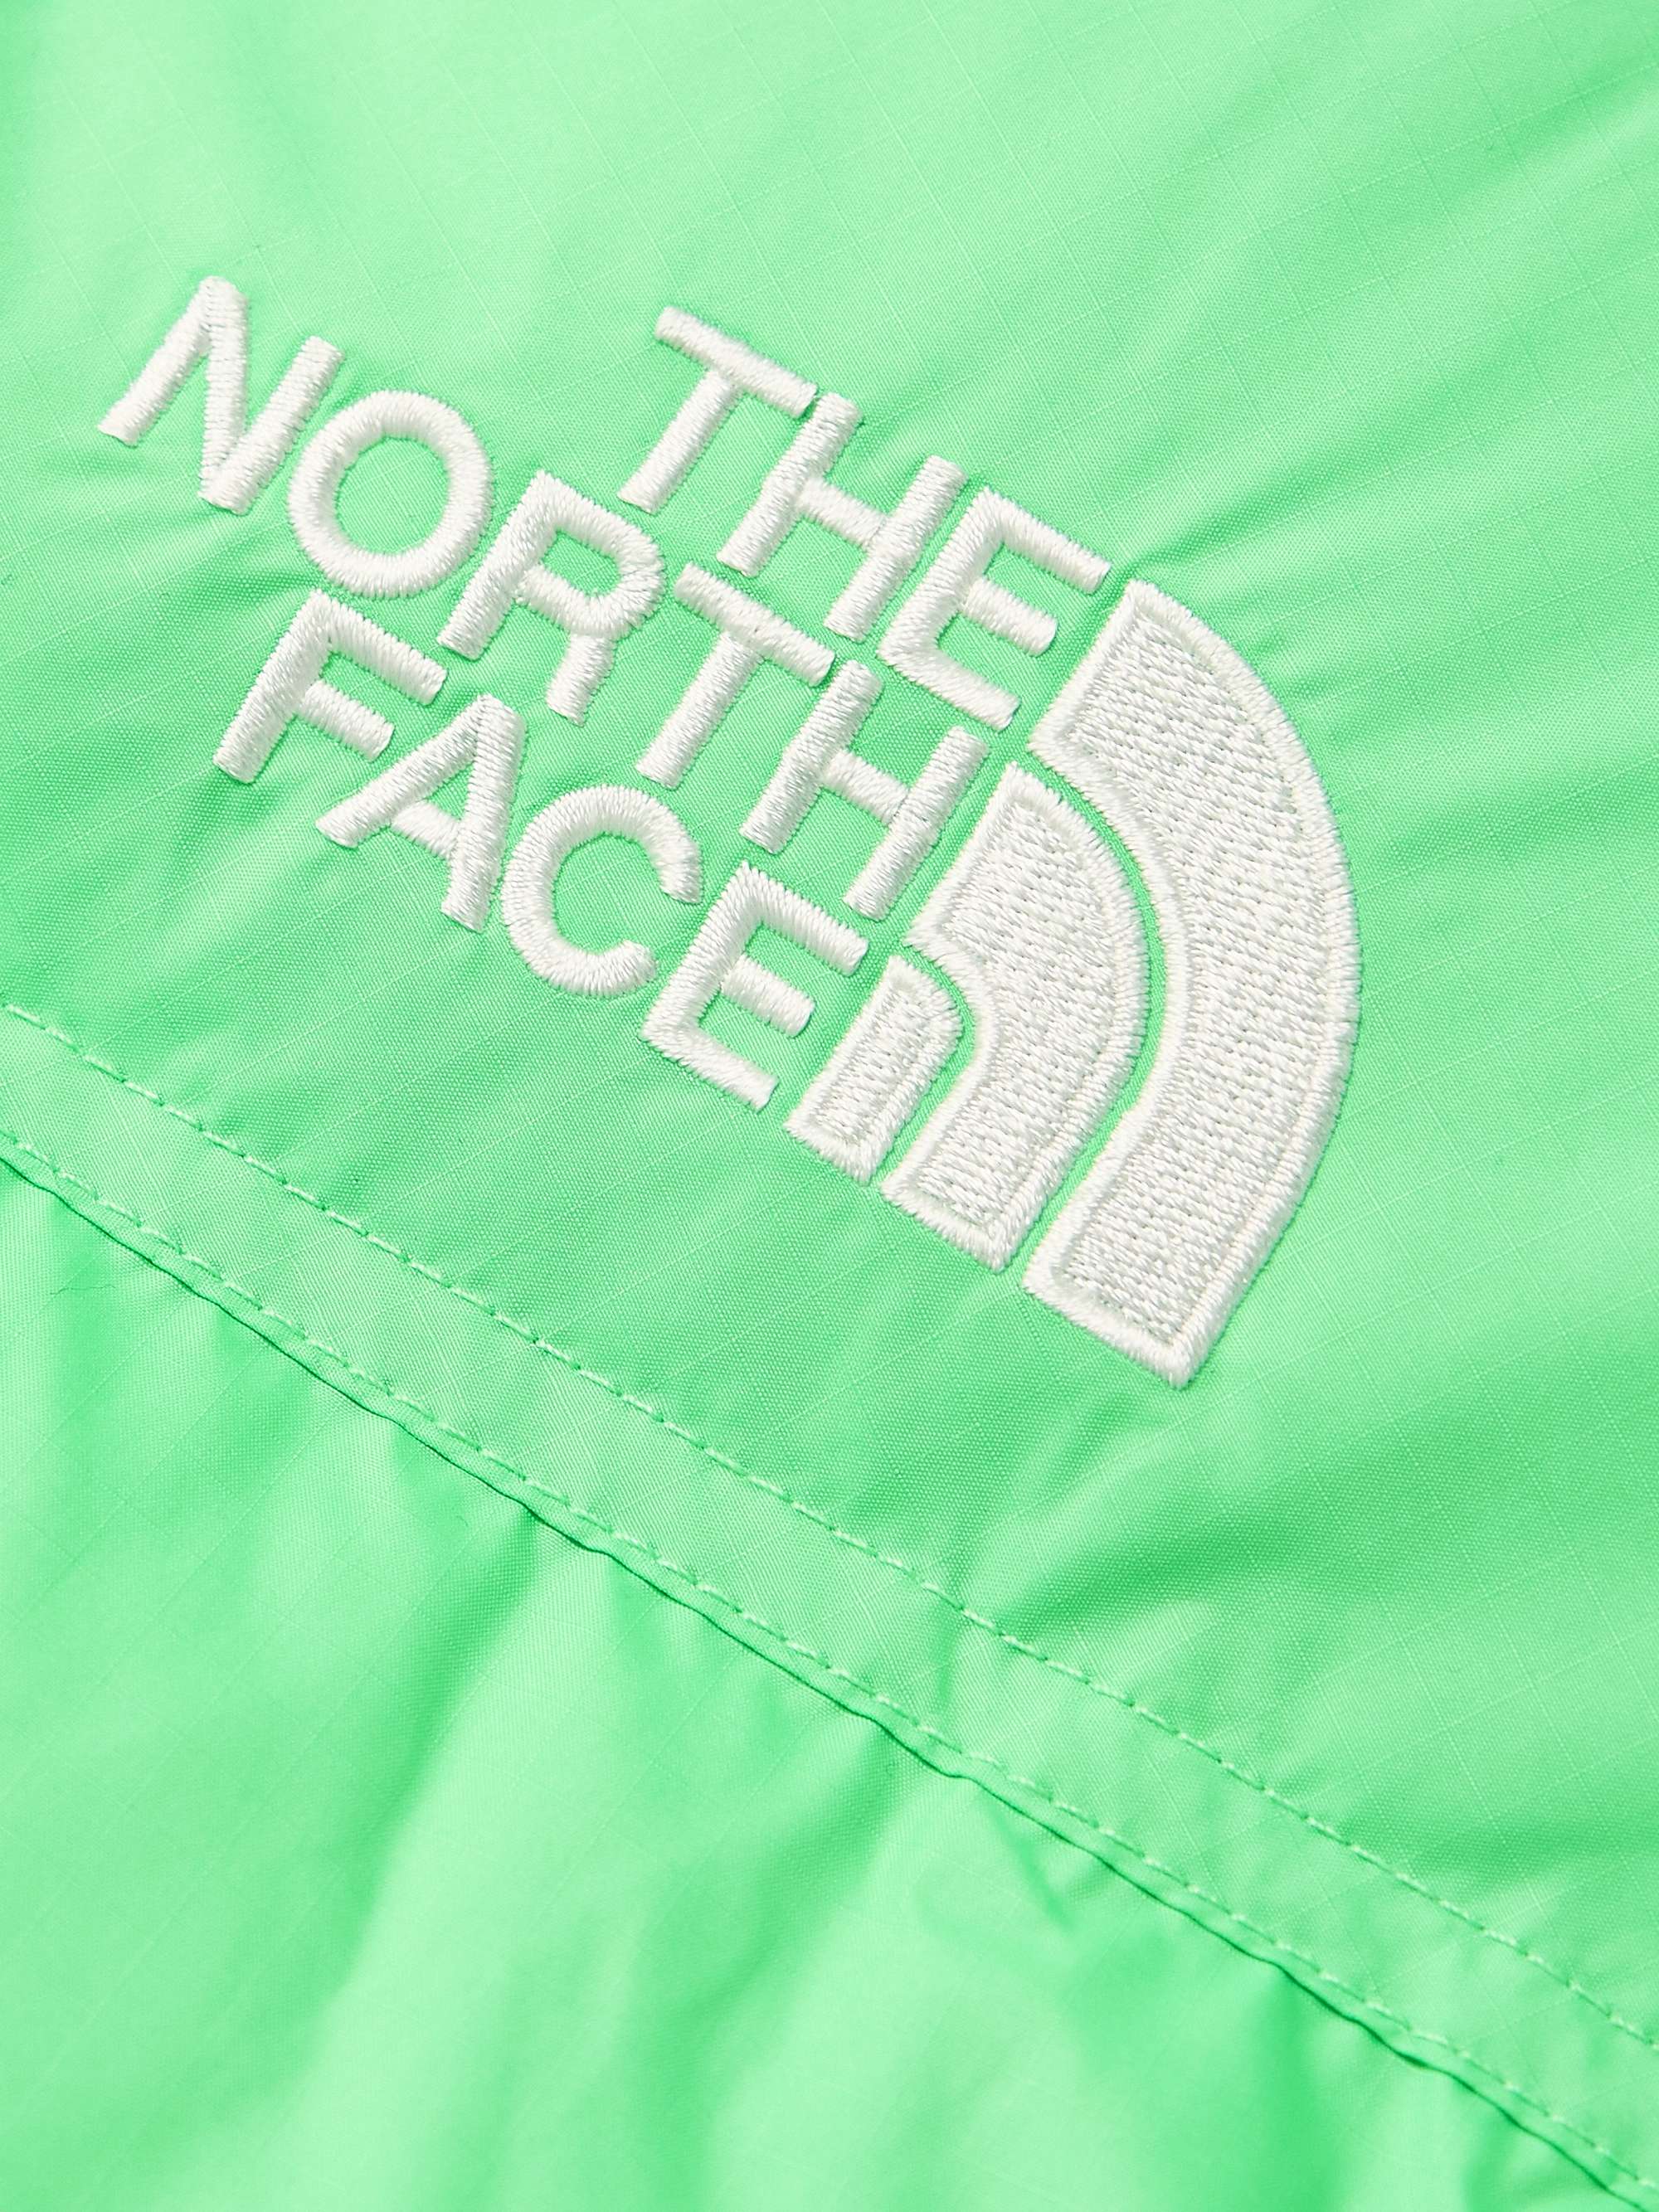 THE NORTH FACE 1996 Retro Nuptse Floral-Print Quilted DWR-Coated Shell Down Jacket